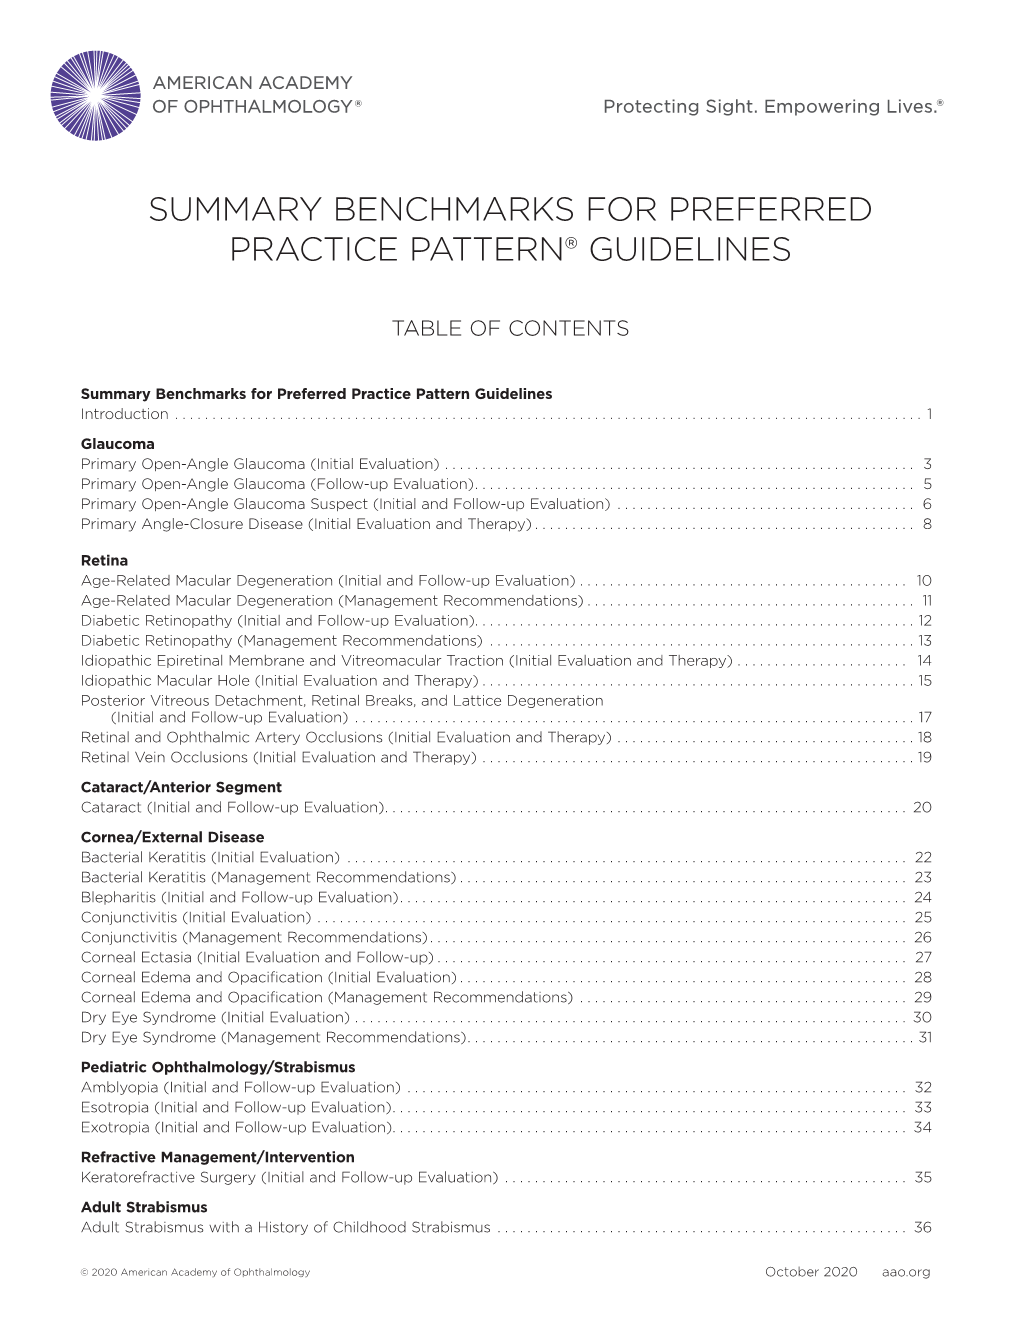 Summary Benchmarks for Preferred Practice Pattern® Guidelines